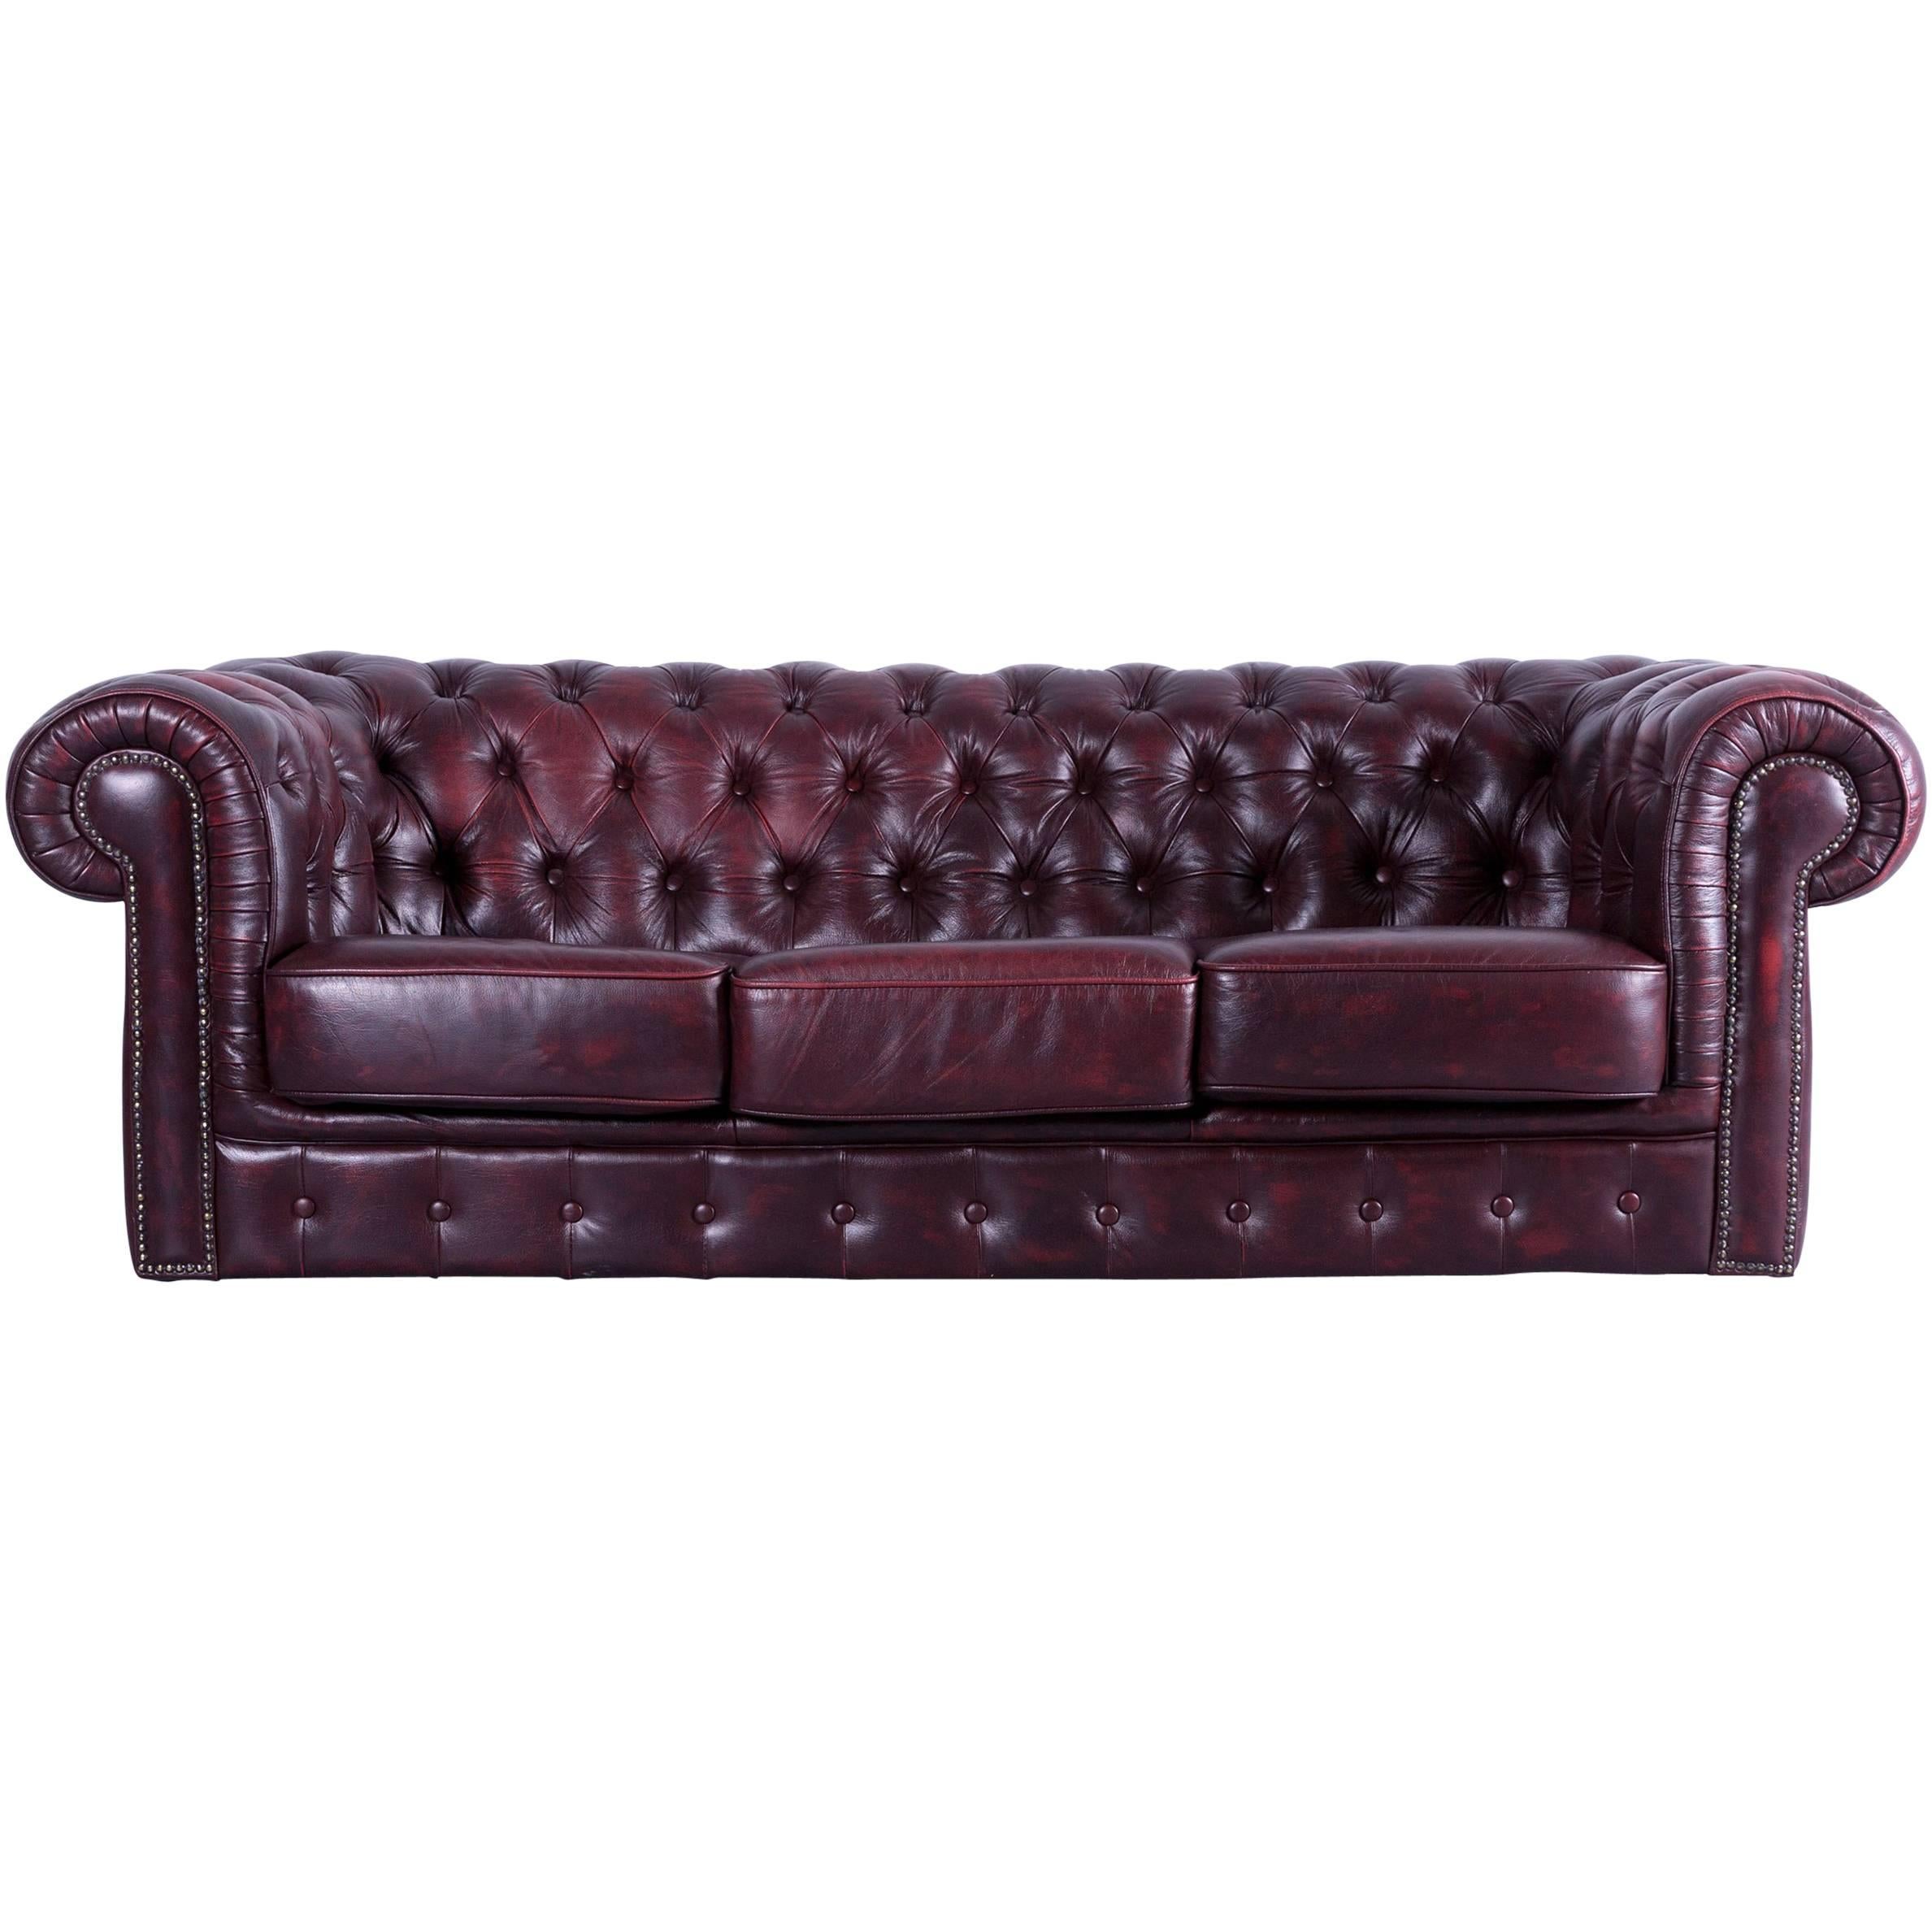 Chesterfield Three-Seat Sofa Red Leather Couch Vintage Retro Rivets